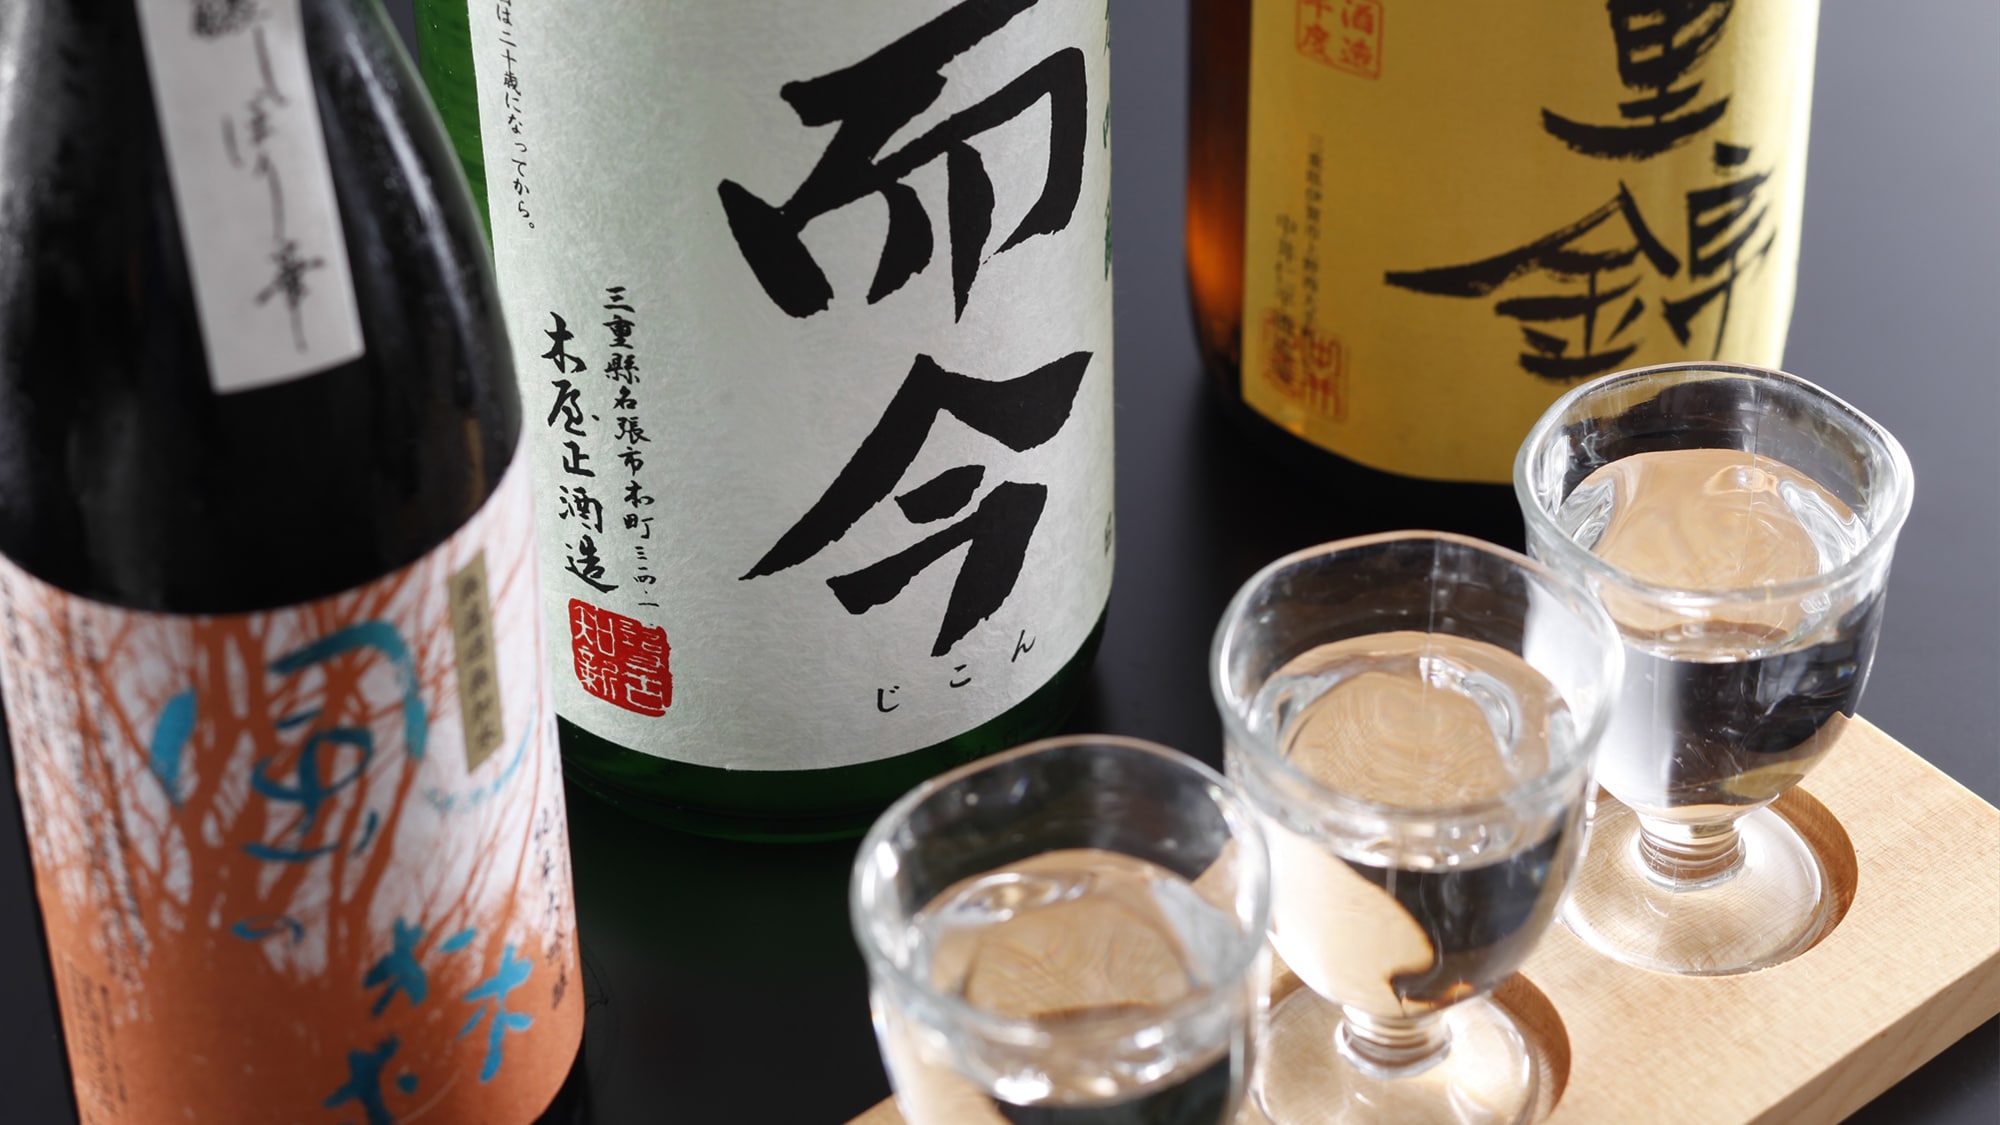 Mie local sake is very popular